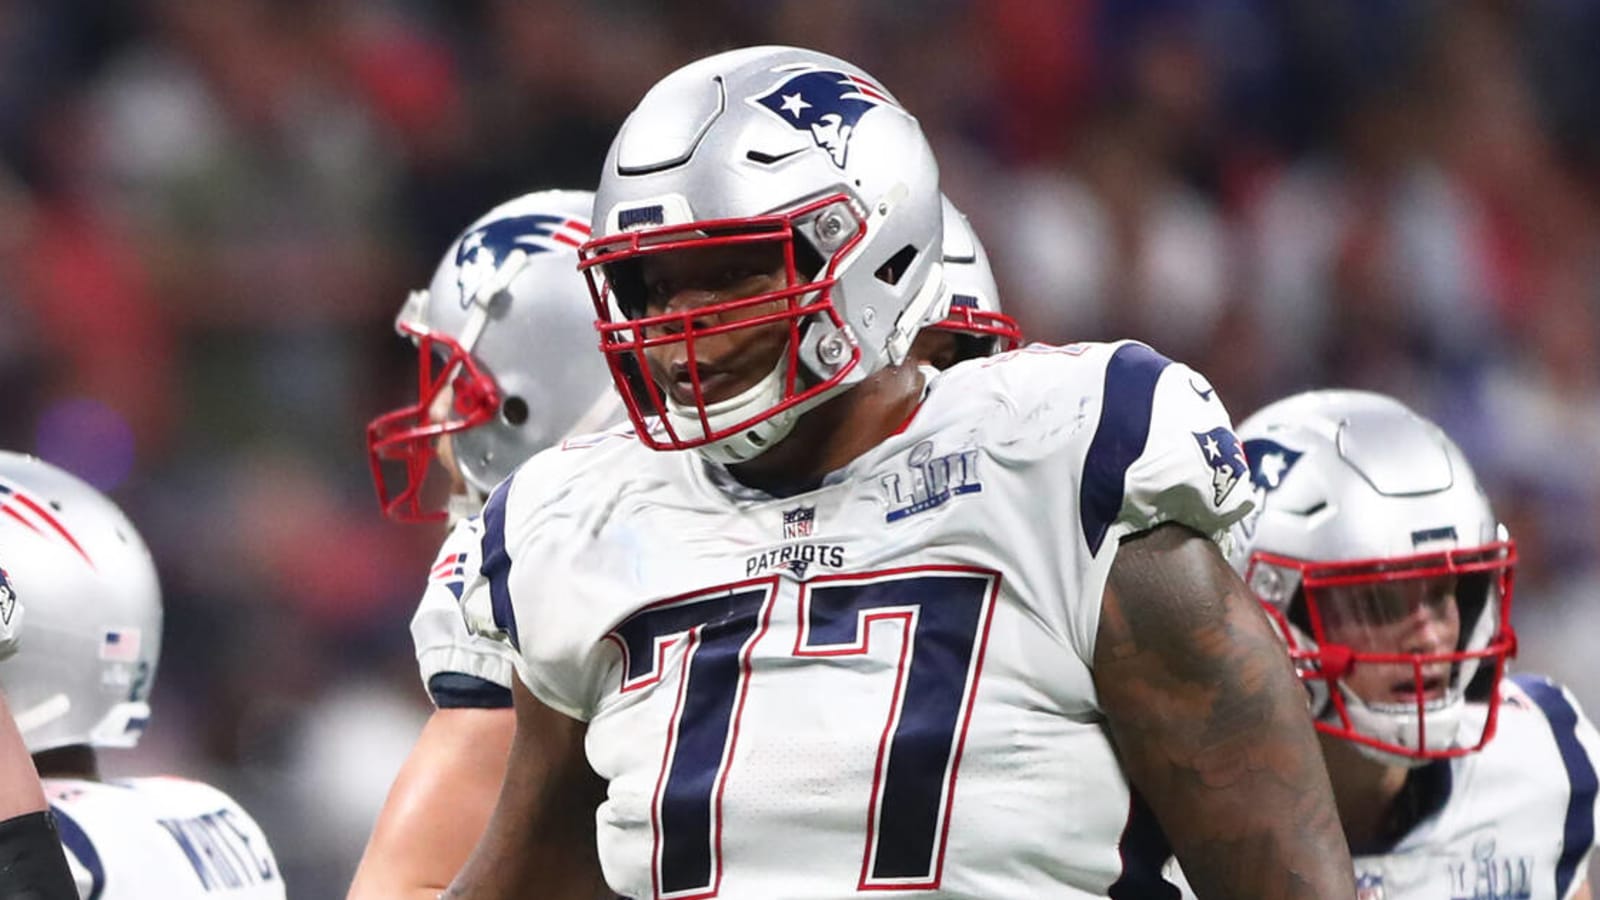 Trent Brown to meet with Seahawks, could return to Pats